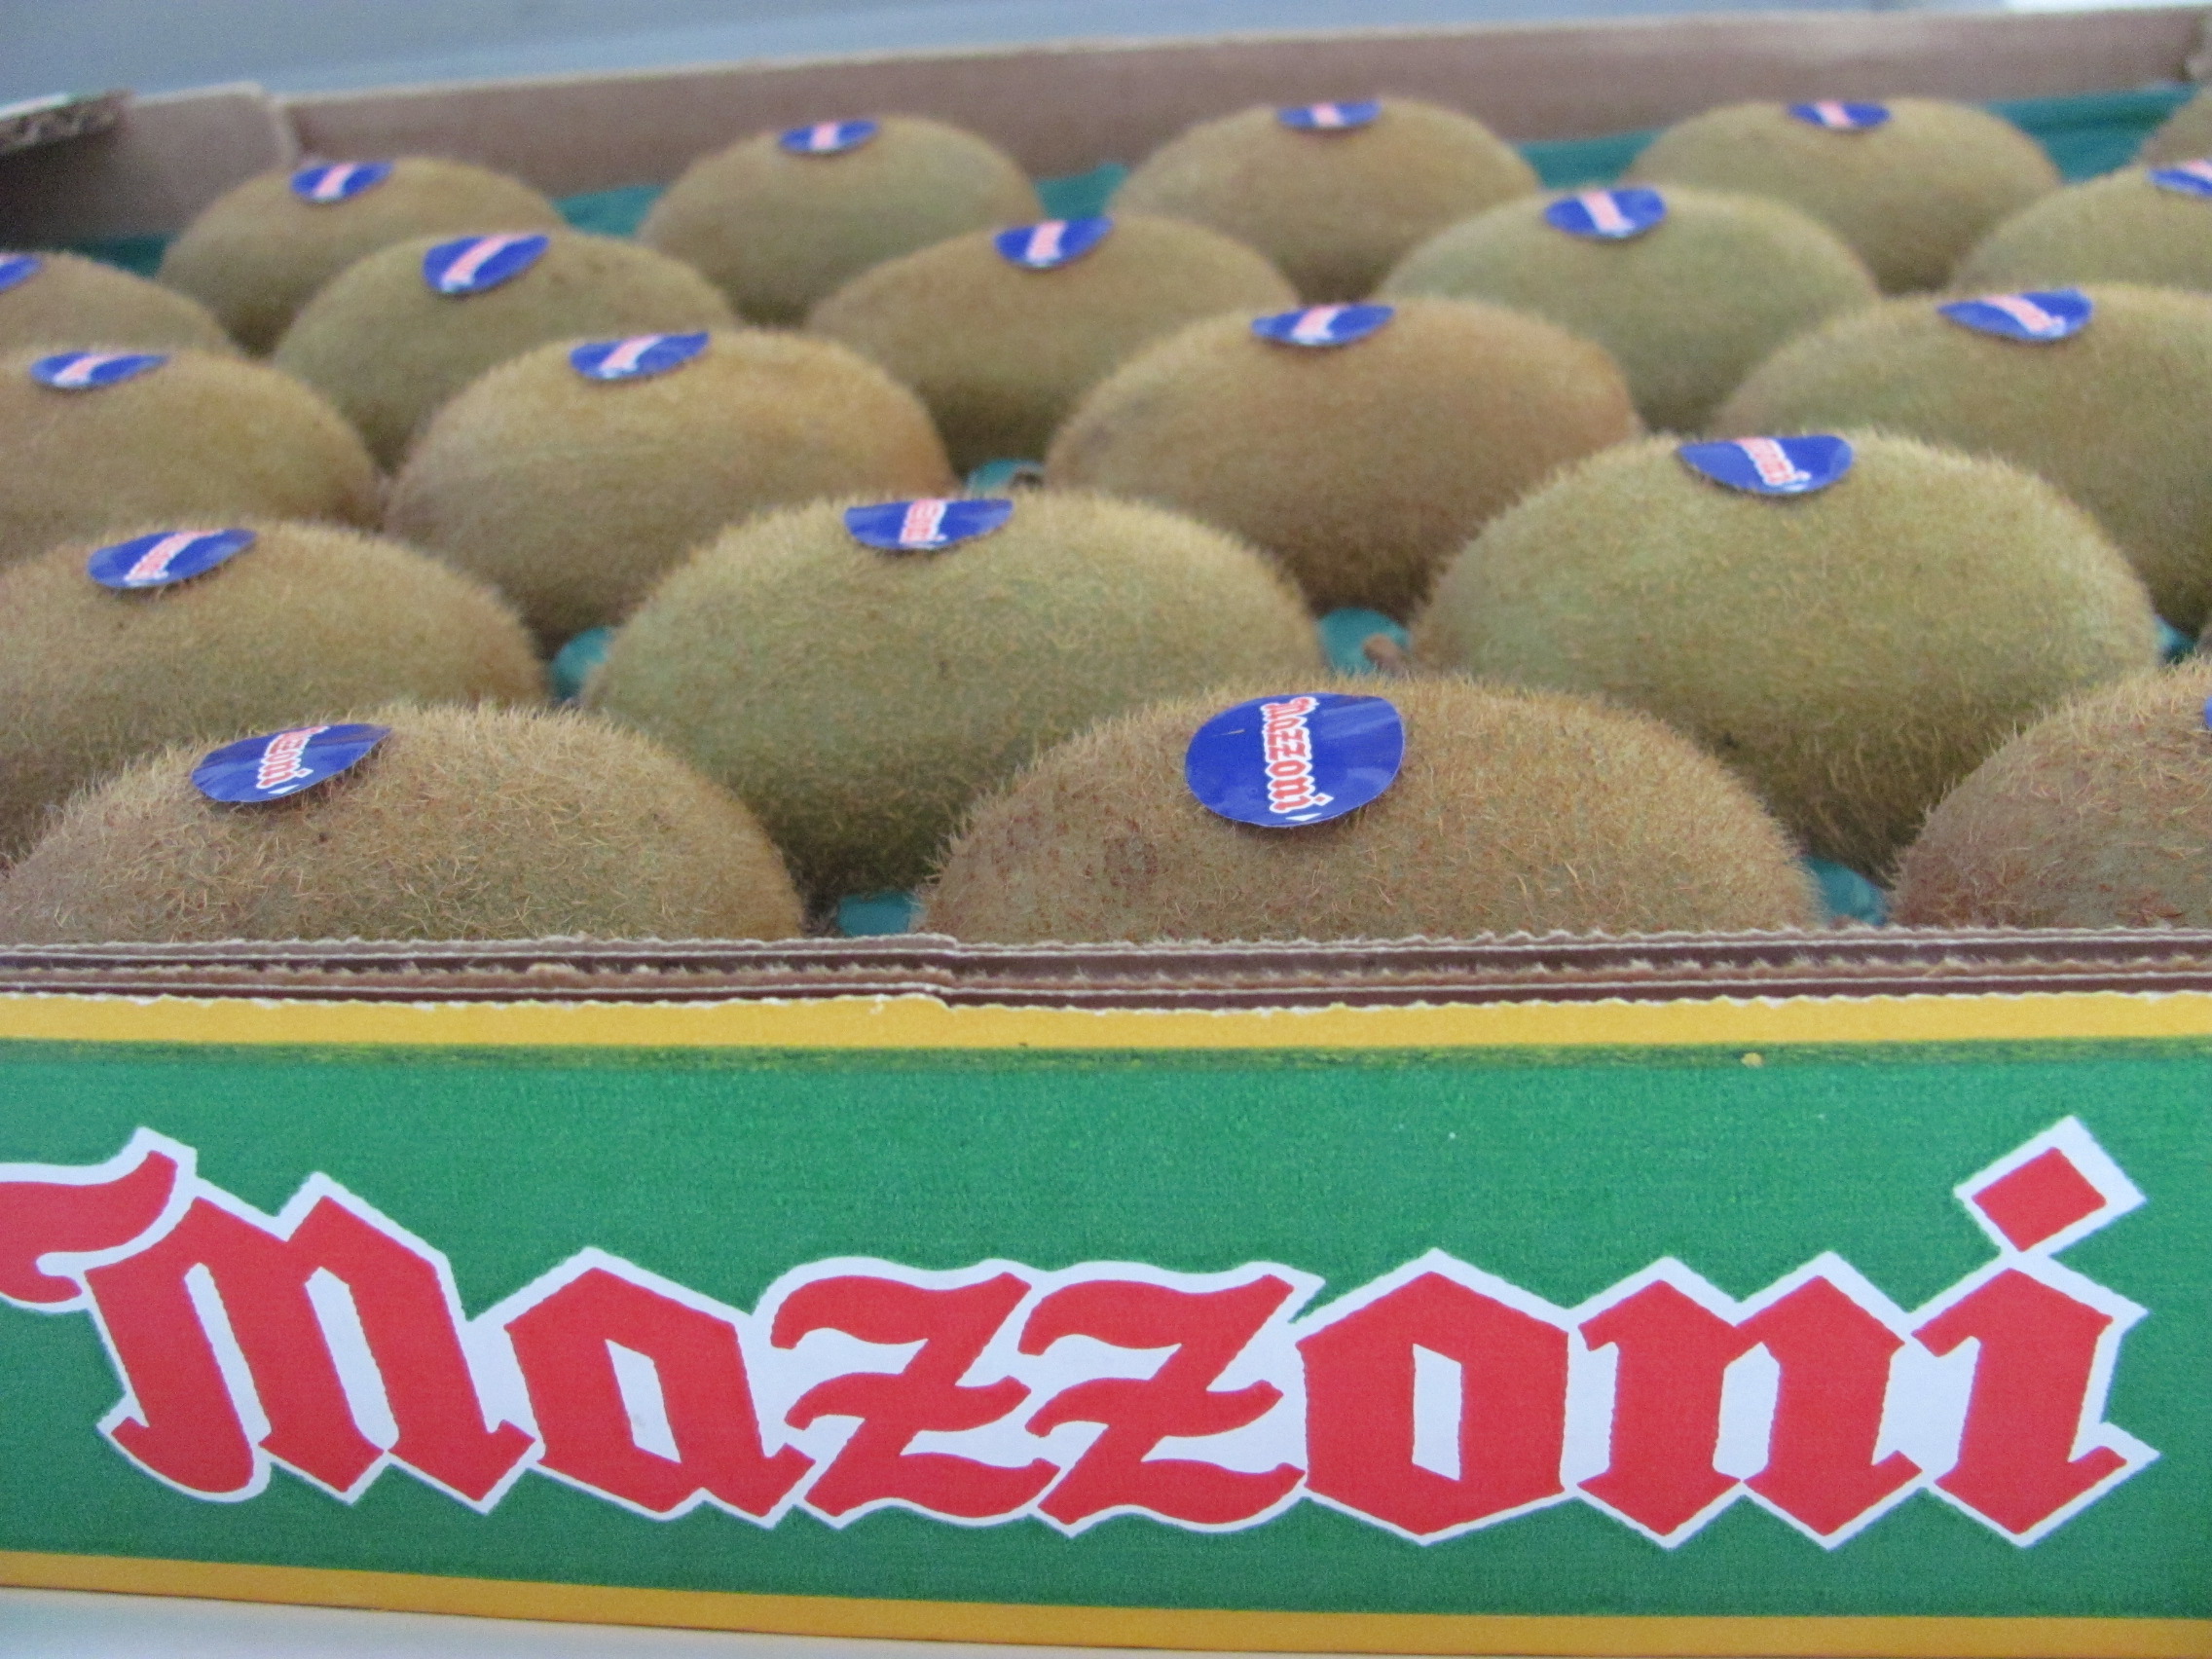 Mazzoni signed a new partnership with Jingold, one of the most prestigious brand for yellow and green kiwi.